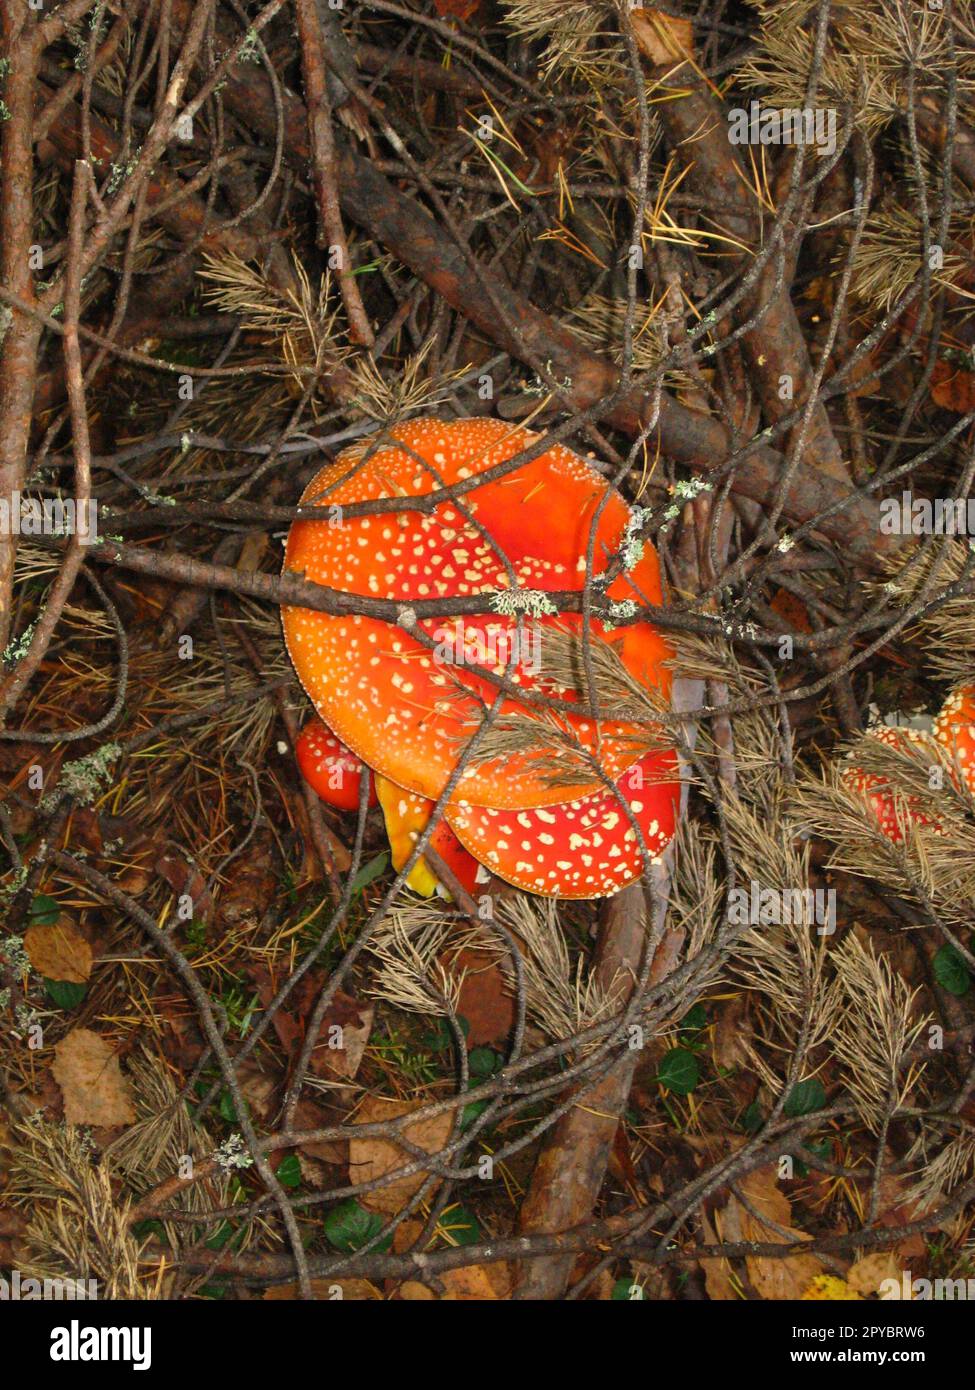 Fly agaric. Several mushrooms with red hats and white dots. Forest mushrooms under dry spruce branches. Autumn wet fallen leaves on the ground. Poisonous mushrooms. Danger to life and health. Stock Photo